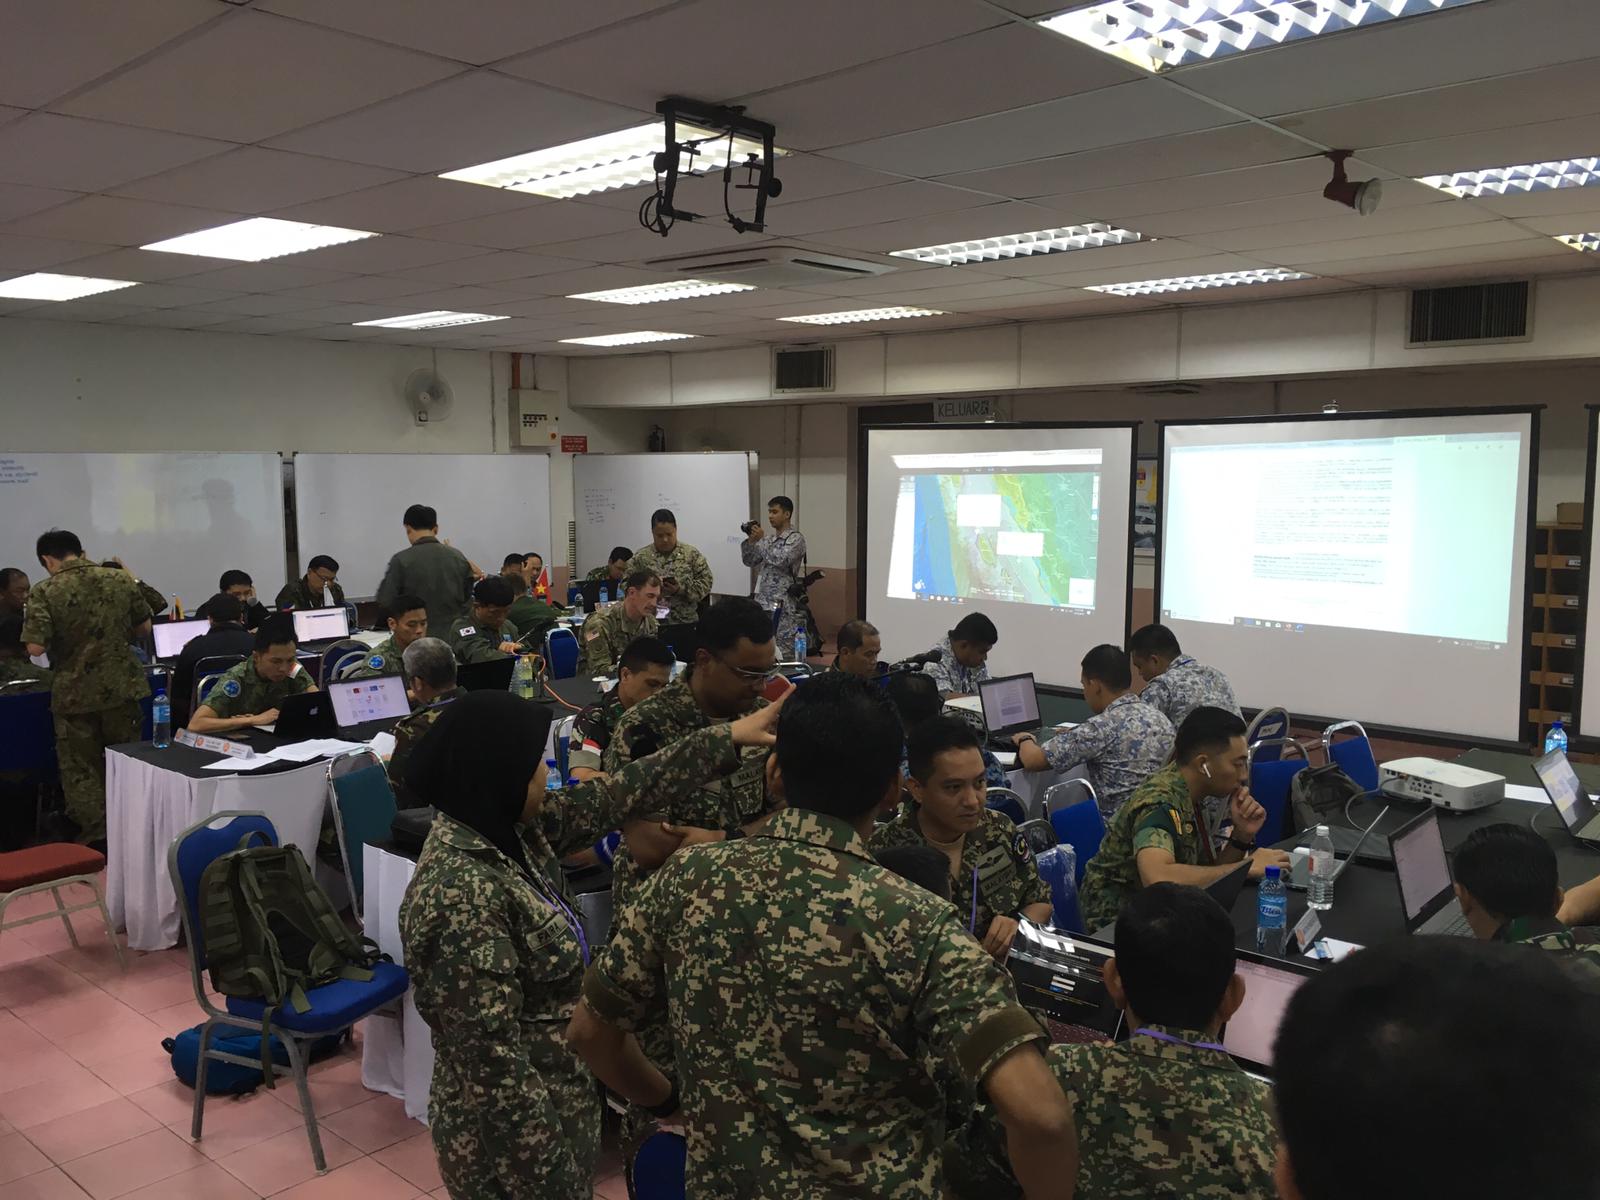 ADMM–Plus Exercise brings together more than 20 countries (2019)